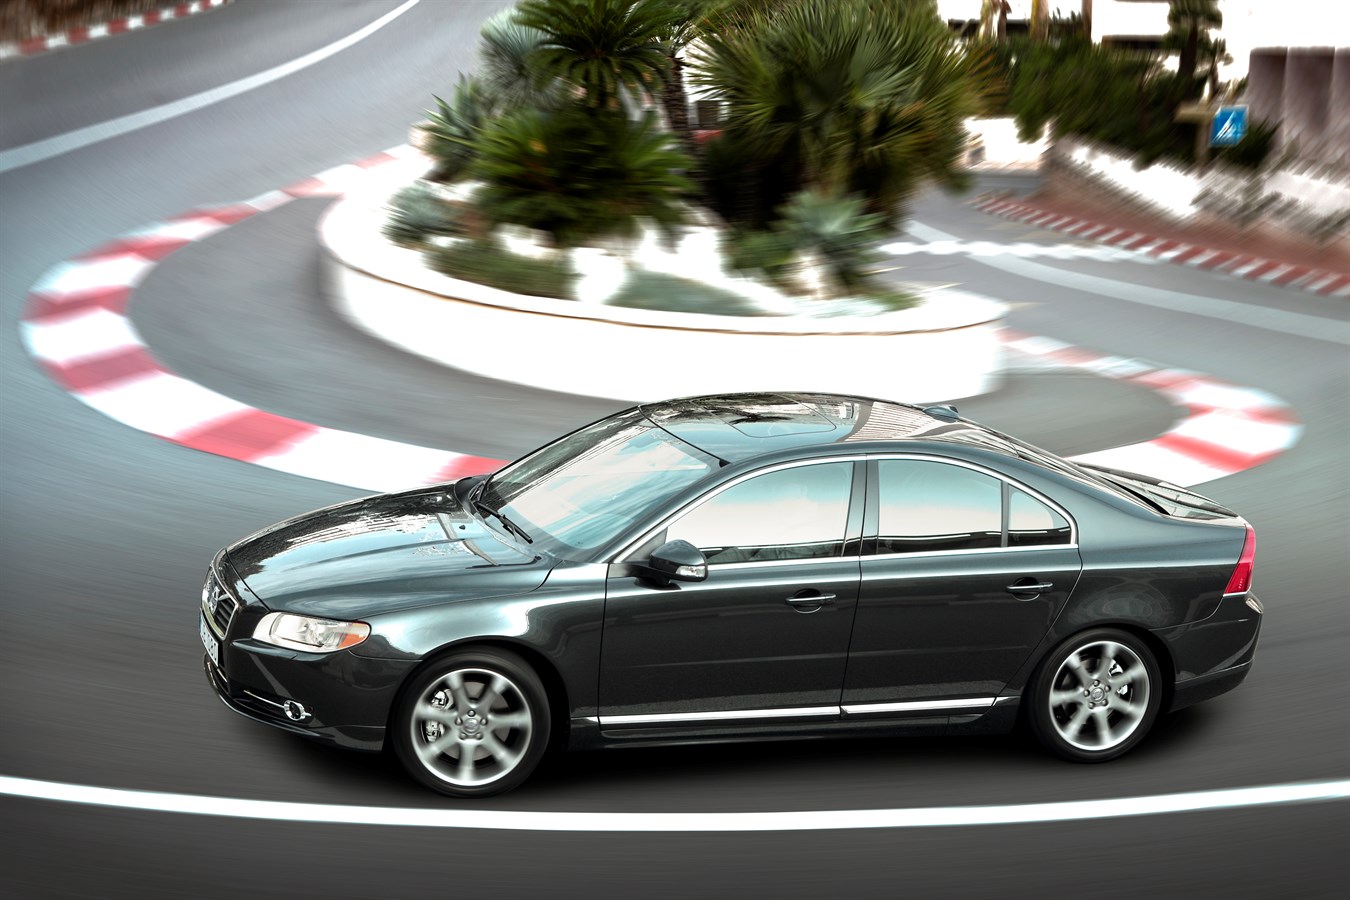 The refreshed Volvo S80 - first class exclusiveness and driving properties  - Volvo Cars Global Media Newsroom